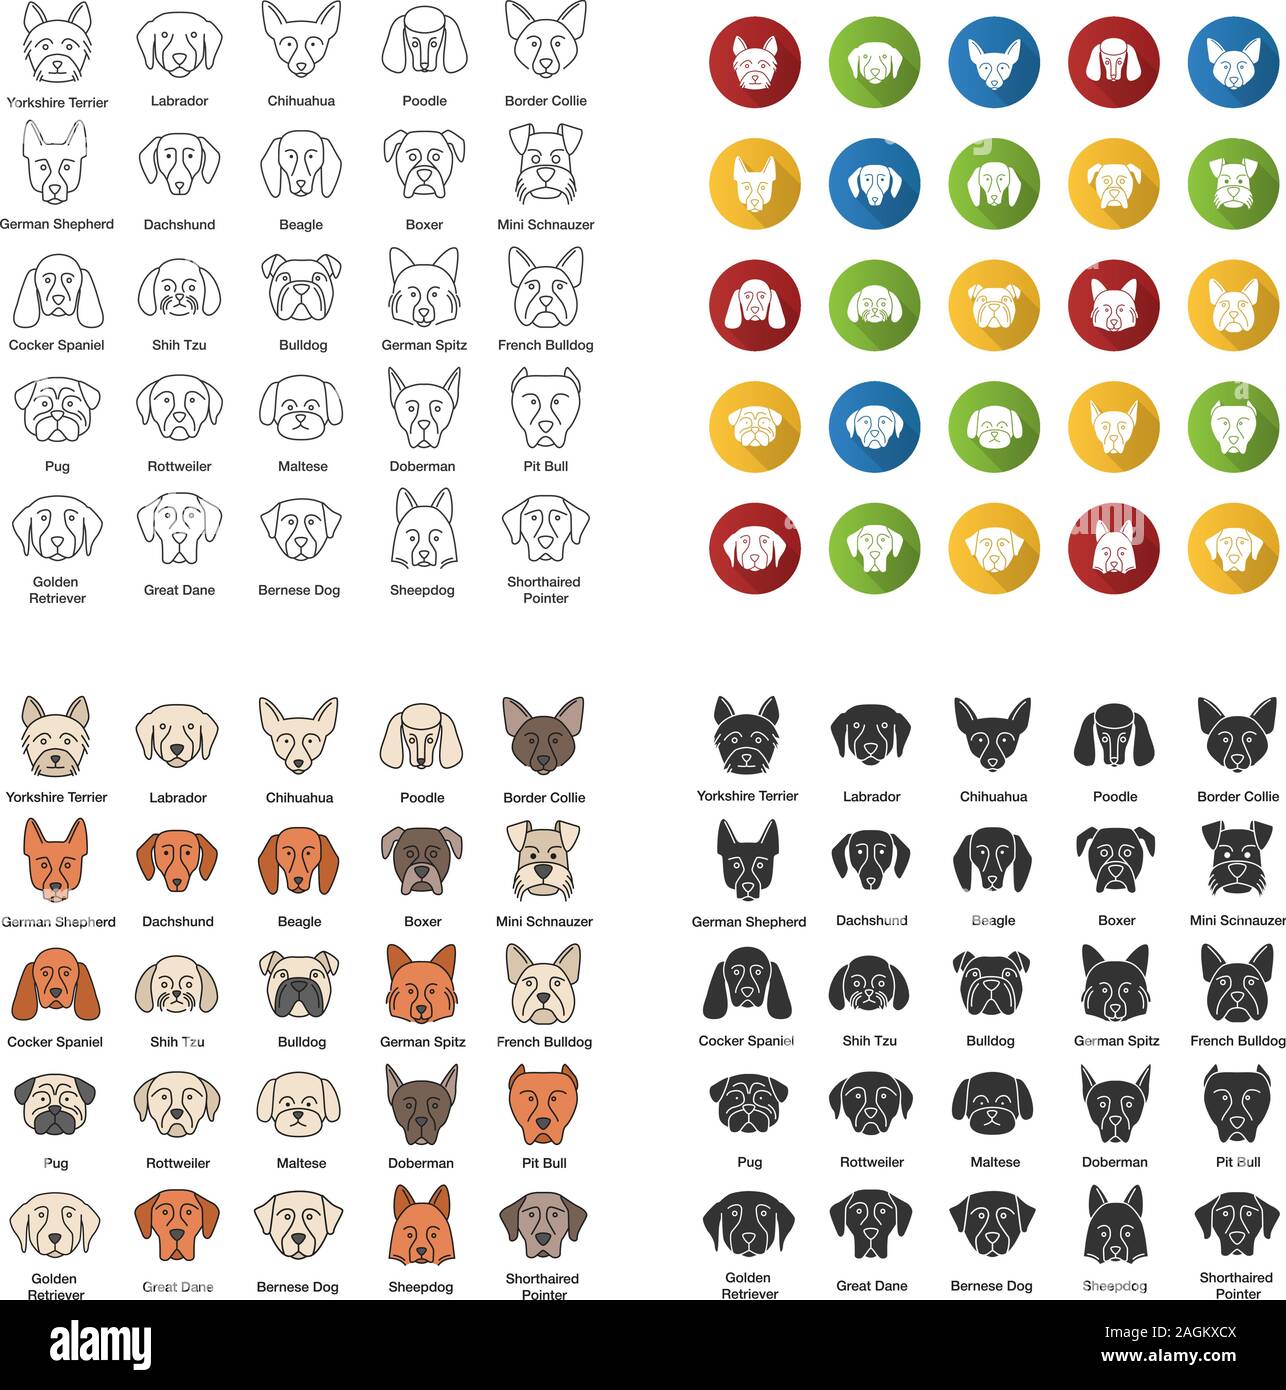 Dogs breeds icons set. Canine. Guide, guardian, hunting, herding dogs. Linear, flat design, color and glyph styles. Isolated vector illustrations Stock Vector